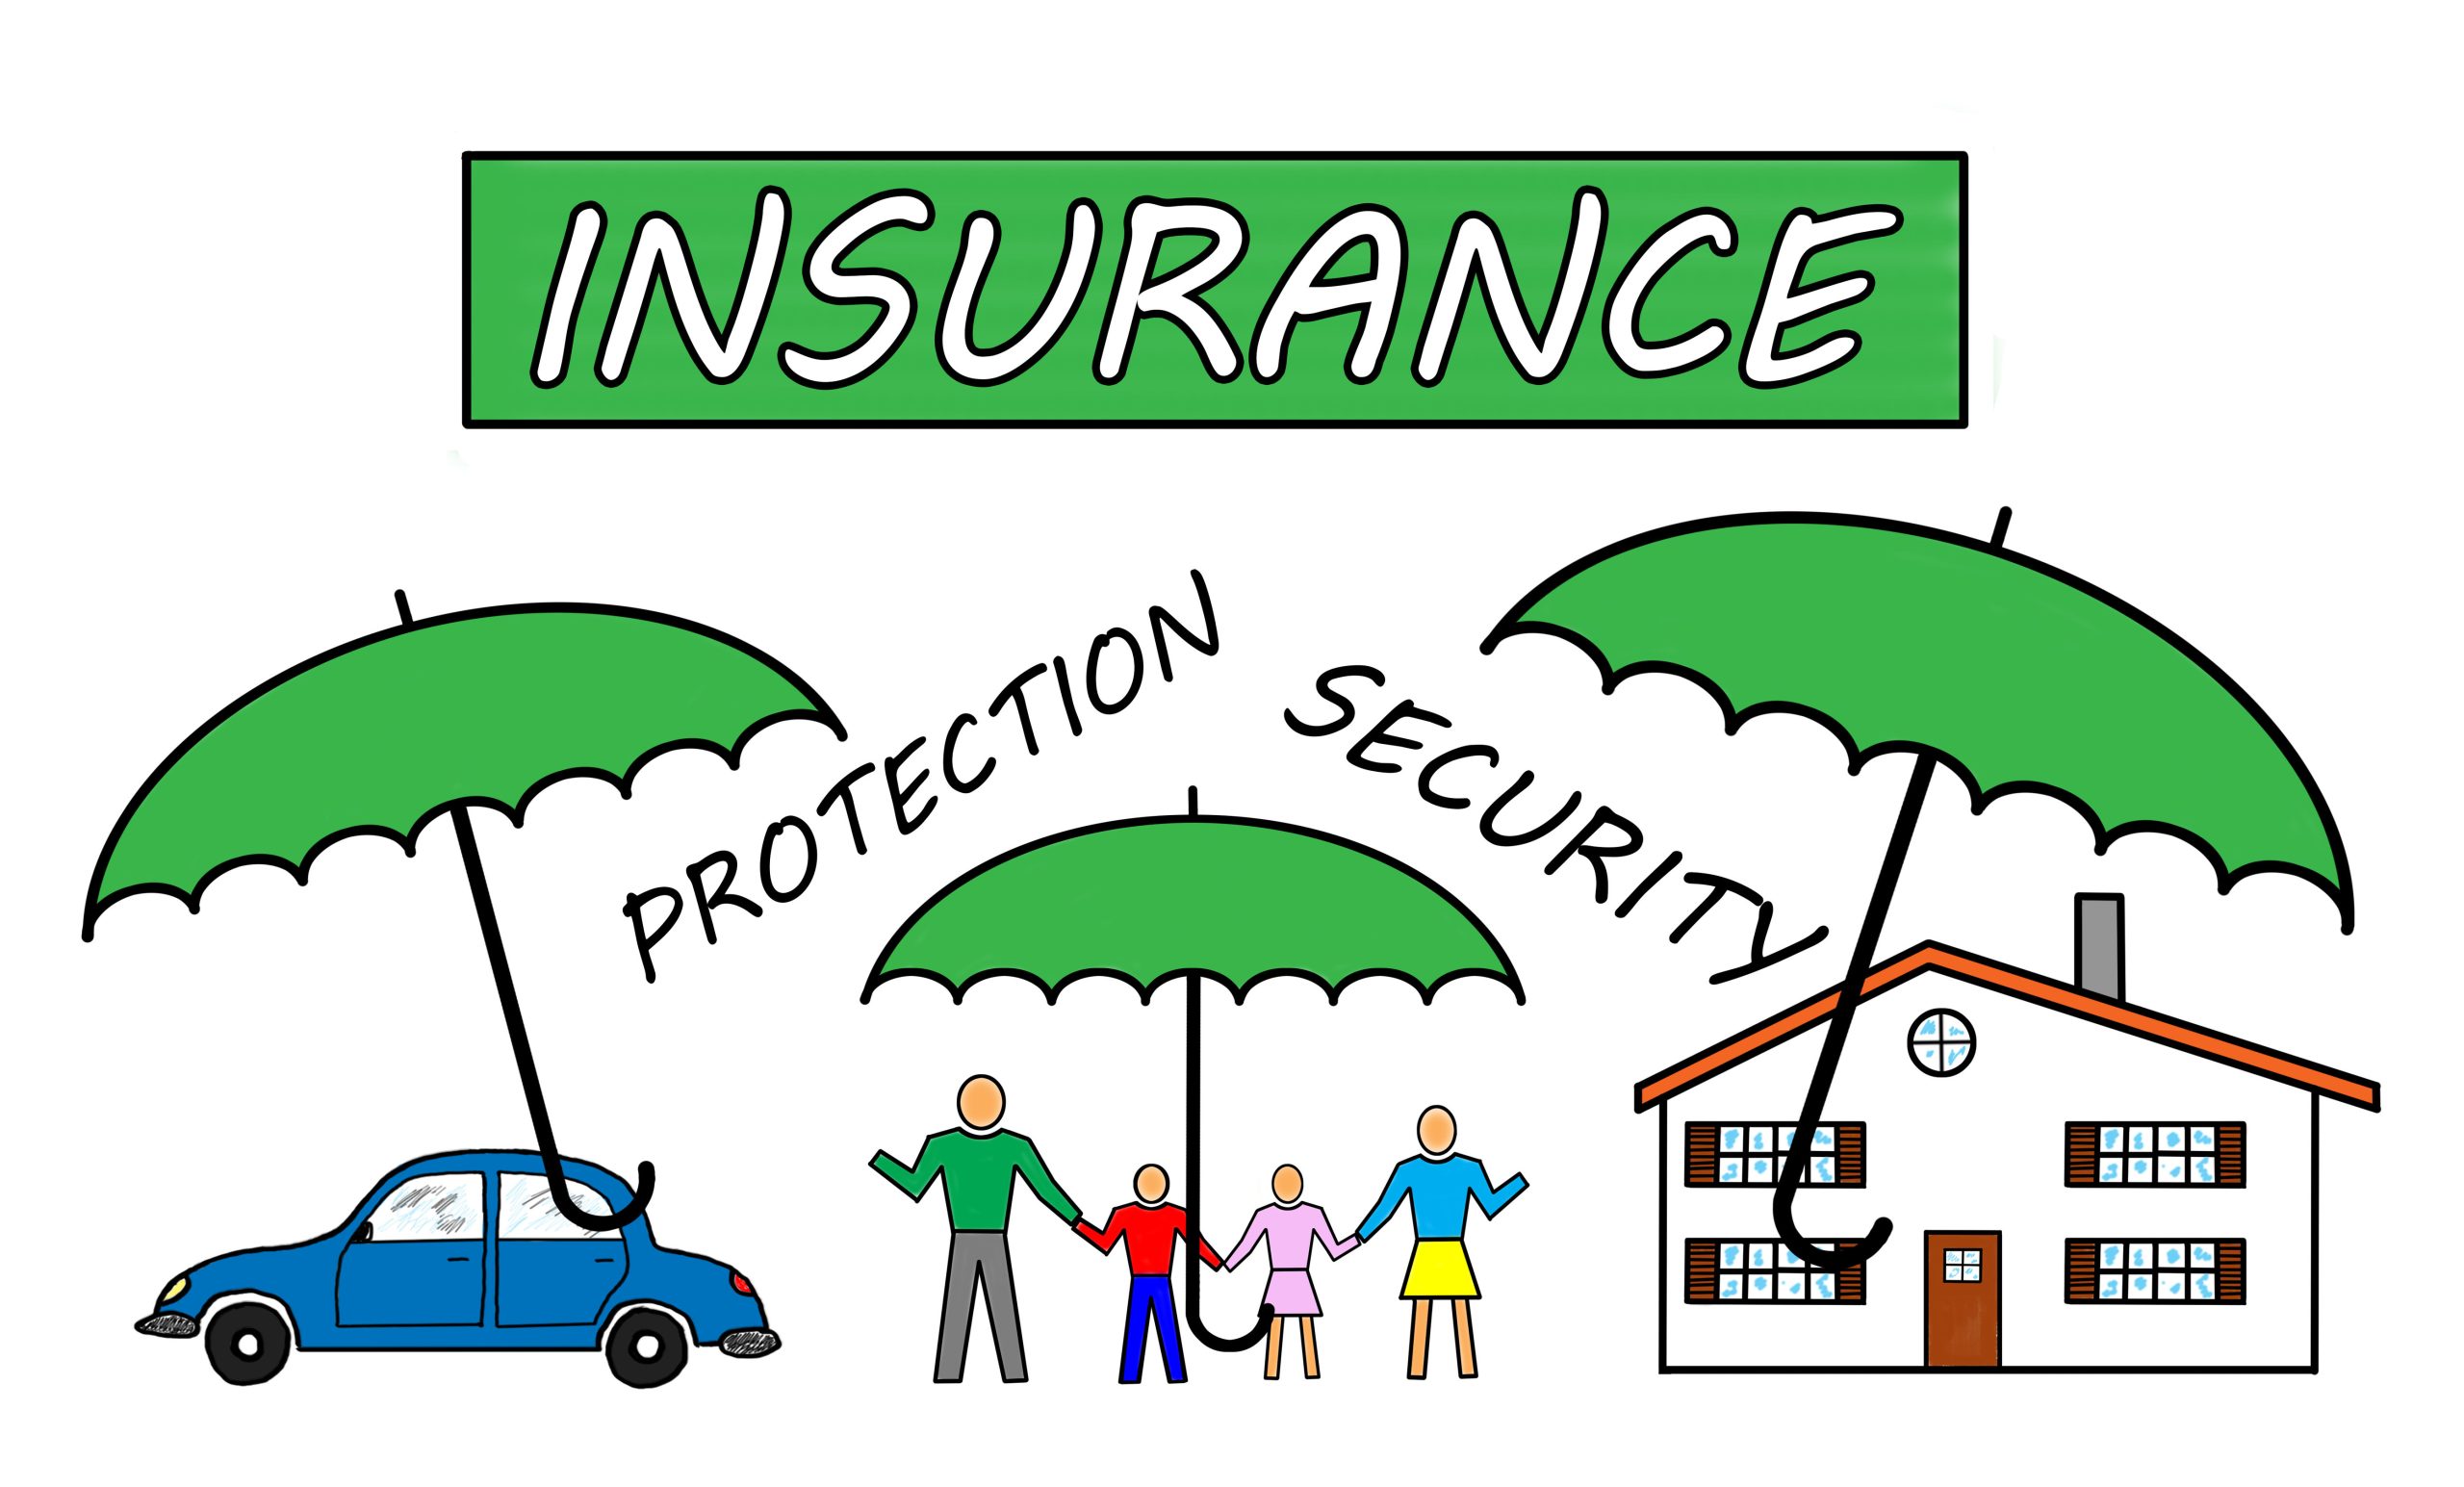 How the Auto and Liability Insurances You Select Can Impact Your Financial Plan